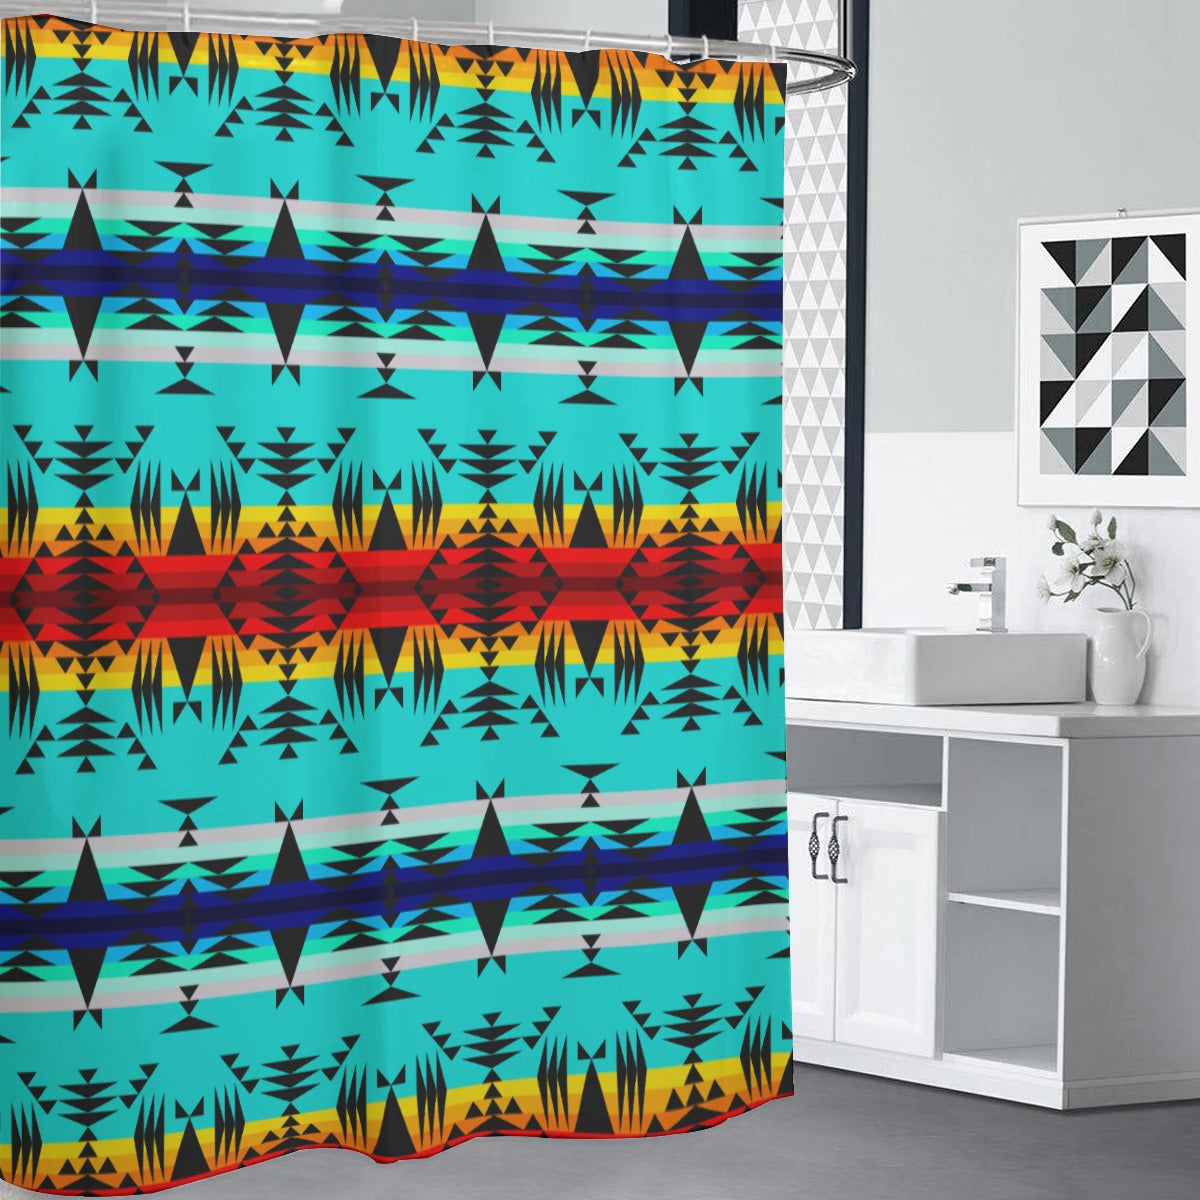 Between the Mountains Shower Curtain (59 inch x 71 inch)